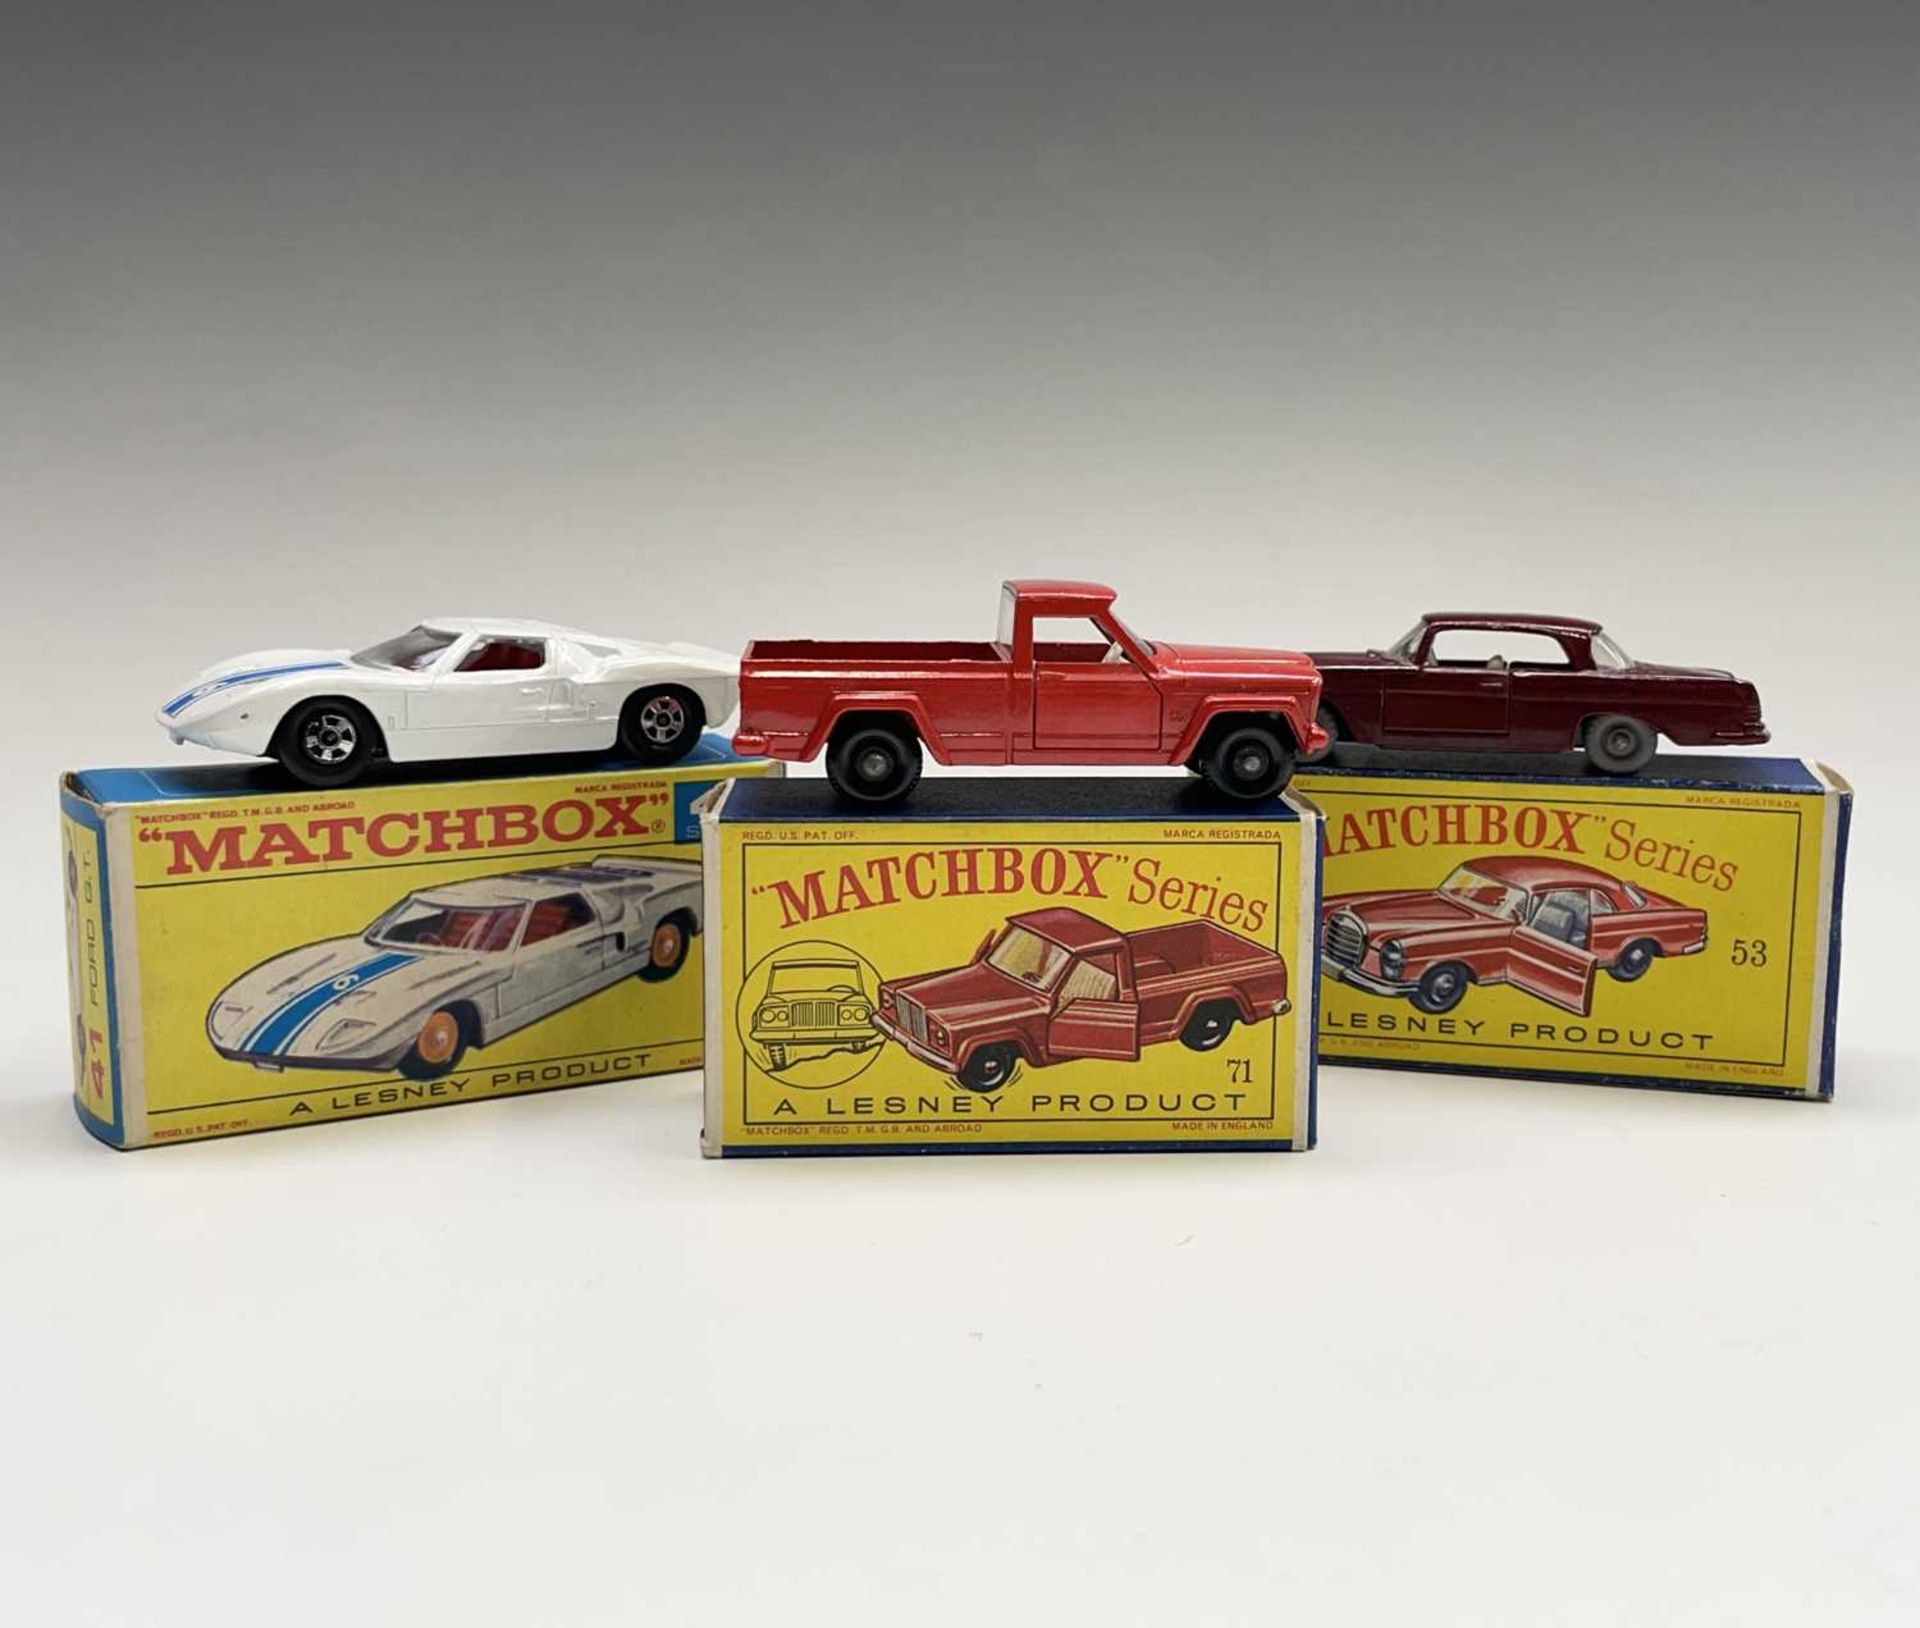 Lesney - Matchbox Toys nos 41, 53 and 71. Ford G.T. superfast wheels, white body. Mercedes-Benz